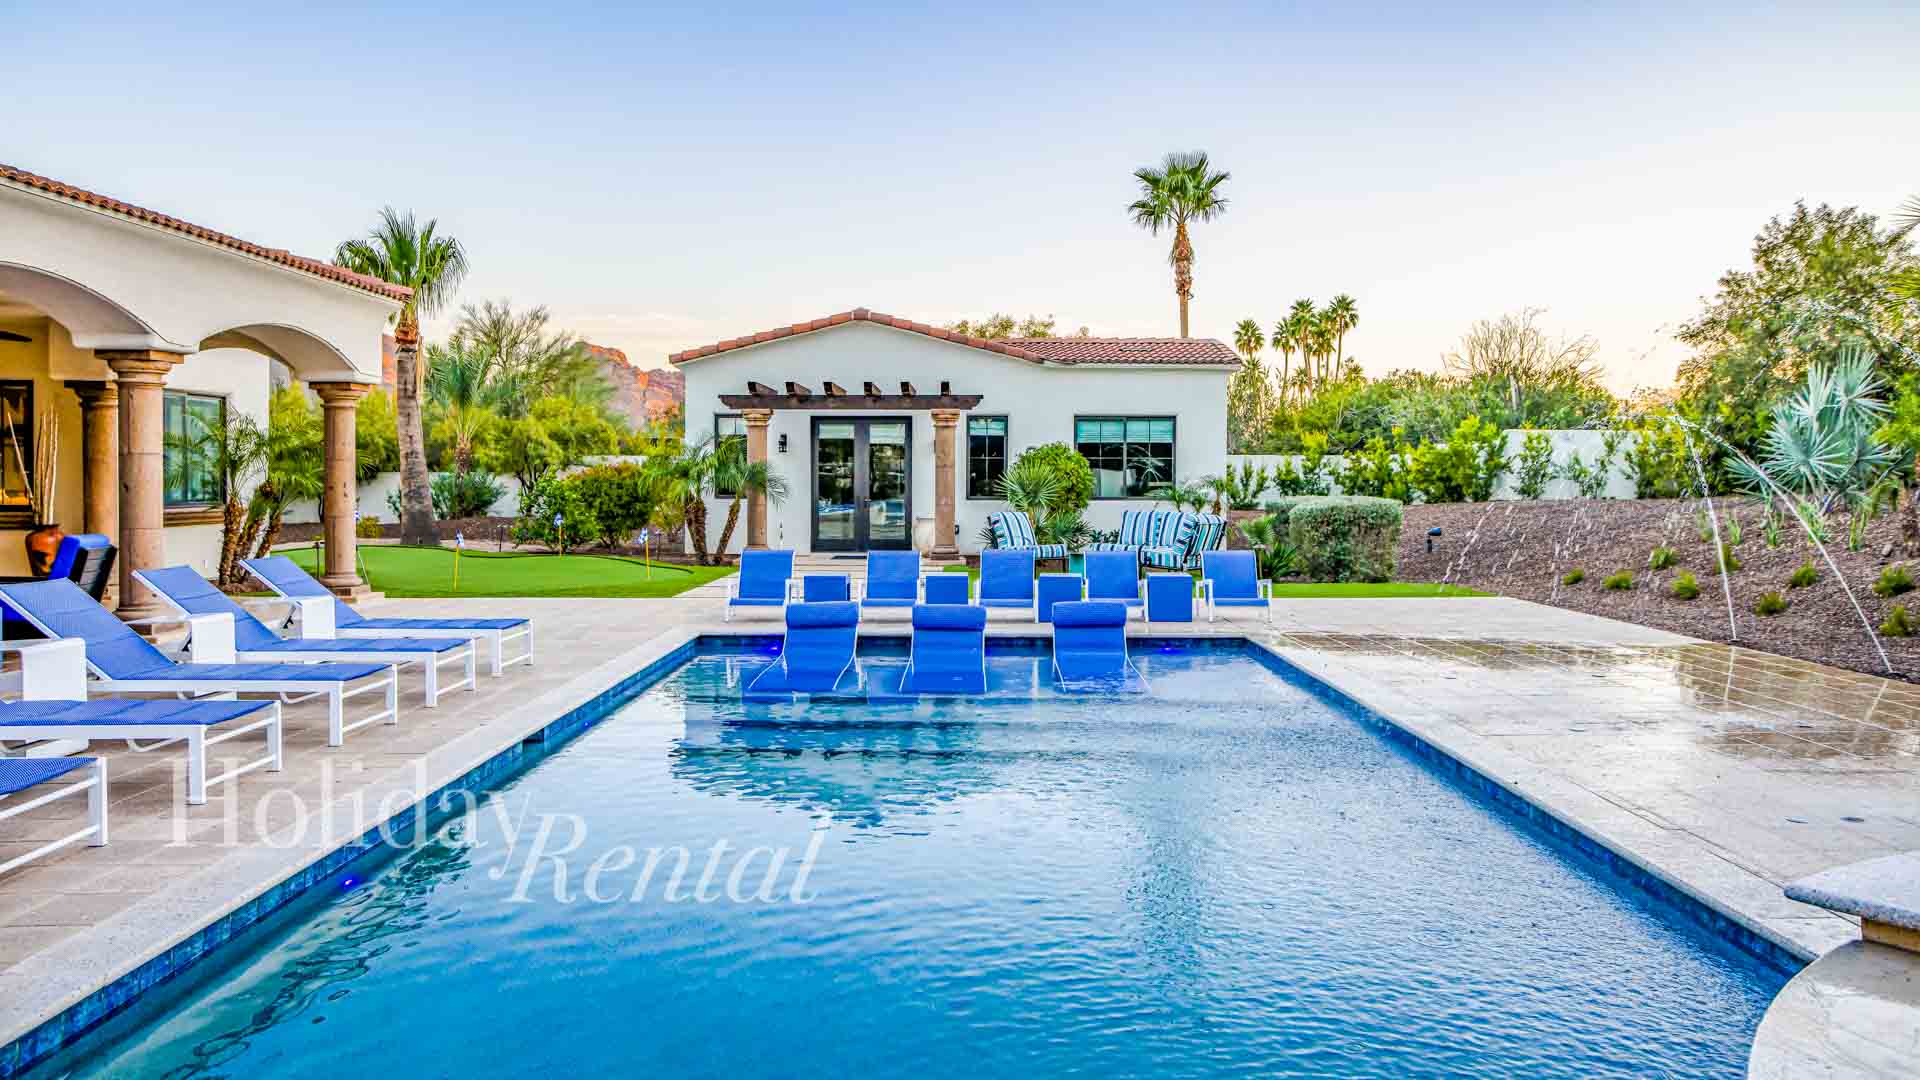 vacation home pool and casita